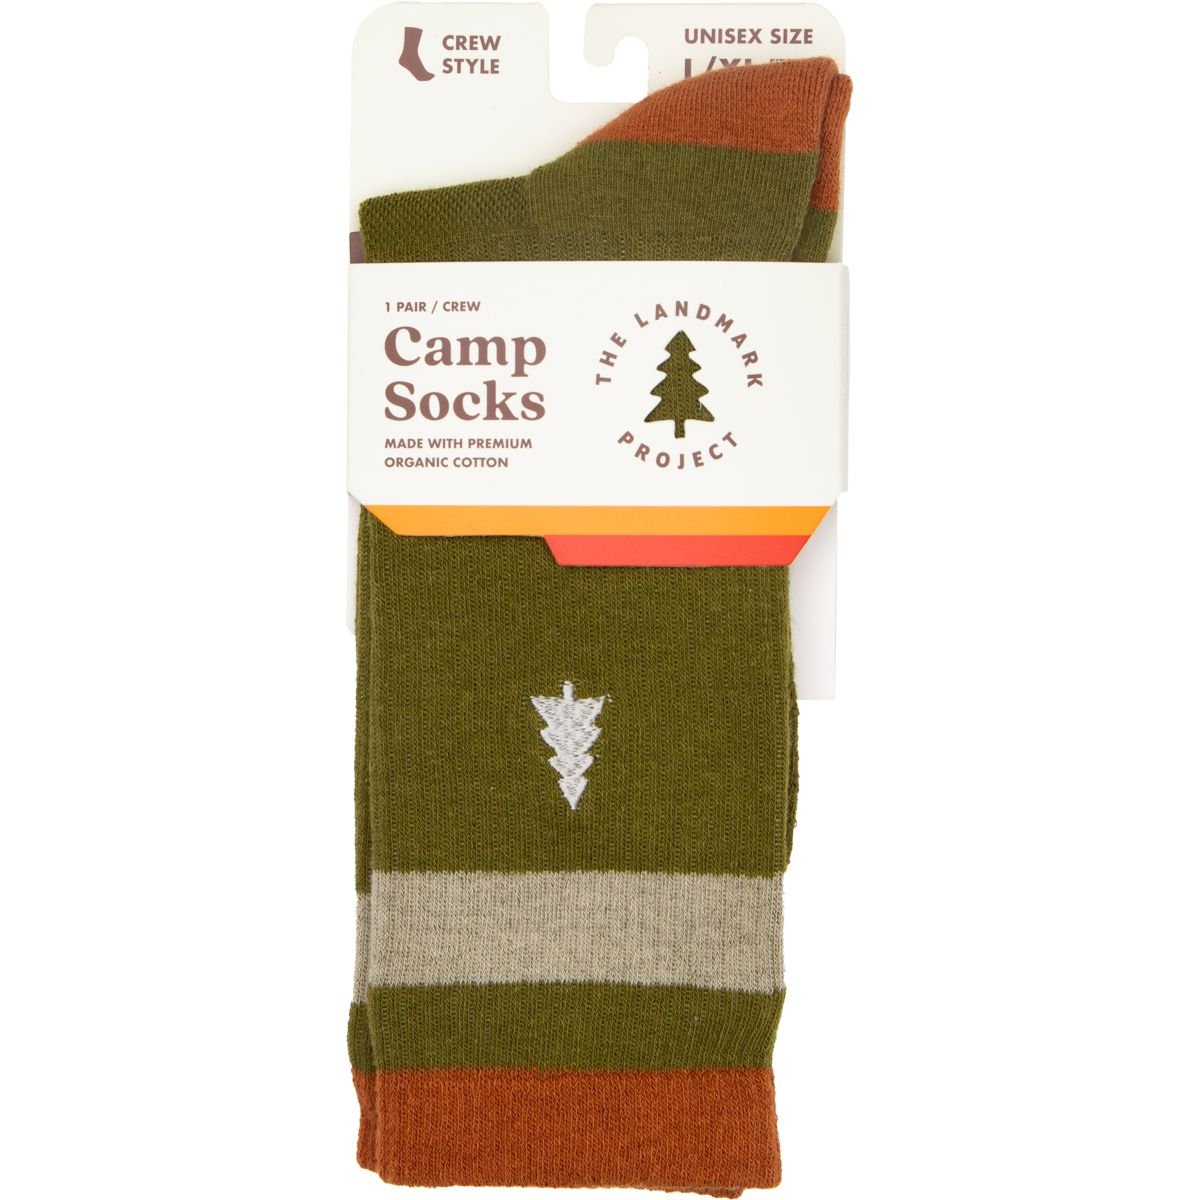 Out-of-Doors Club Sock: S/M / Olive